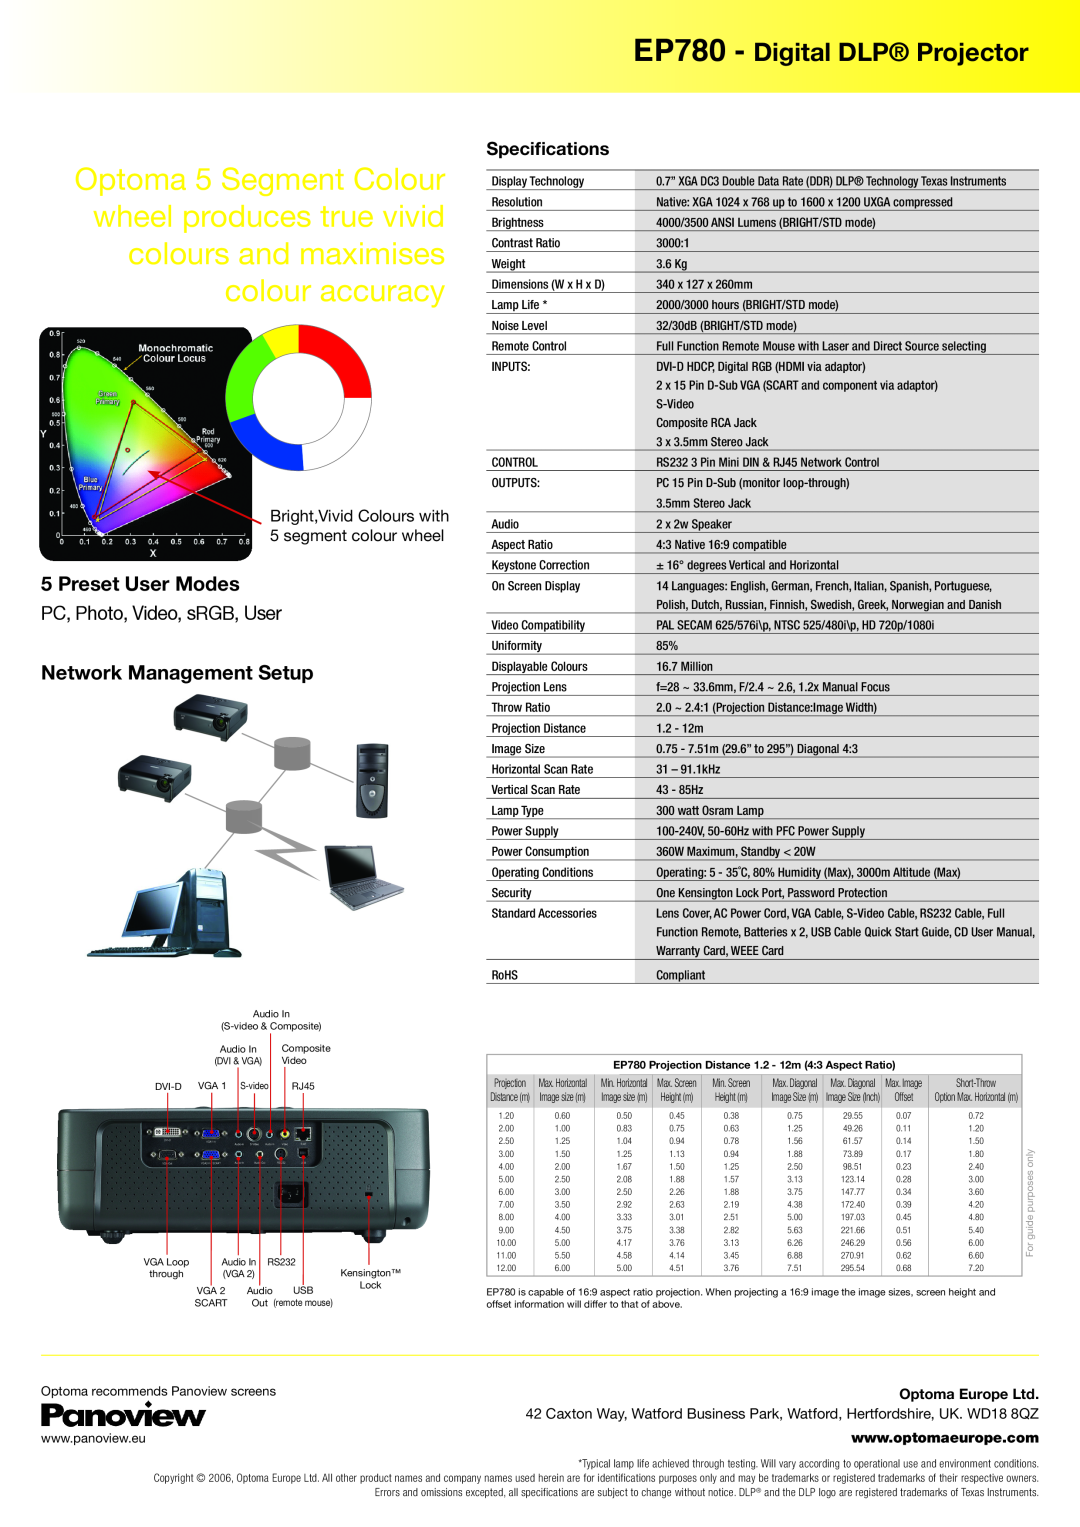 Optoma Technology manual EP780 - Digital DLP Projector, Preset User Modes, PC, Photo, Video, sRGB, User, Speciﬁcations 